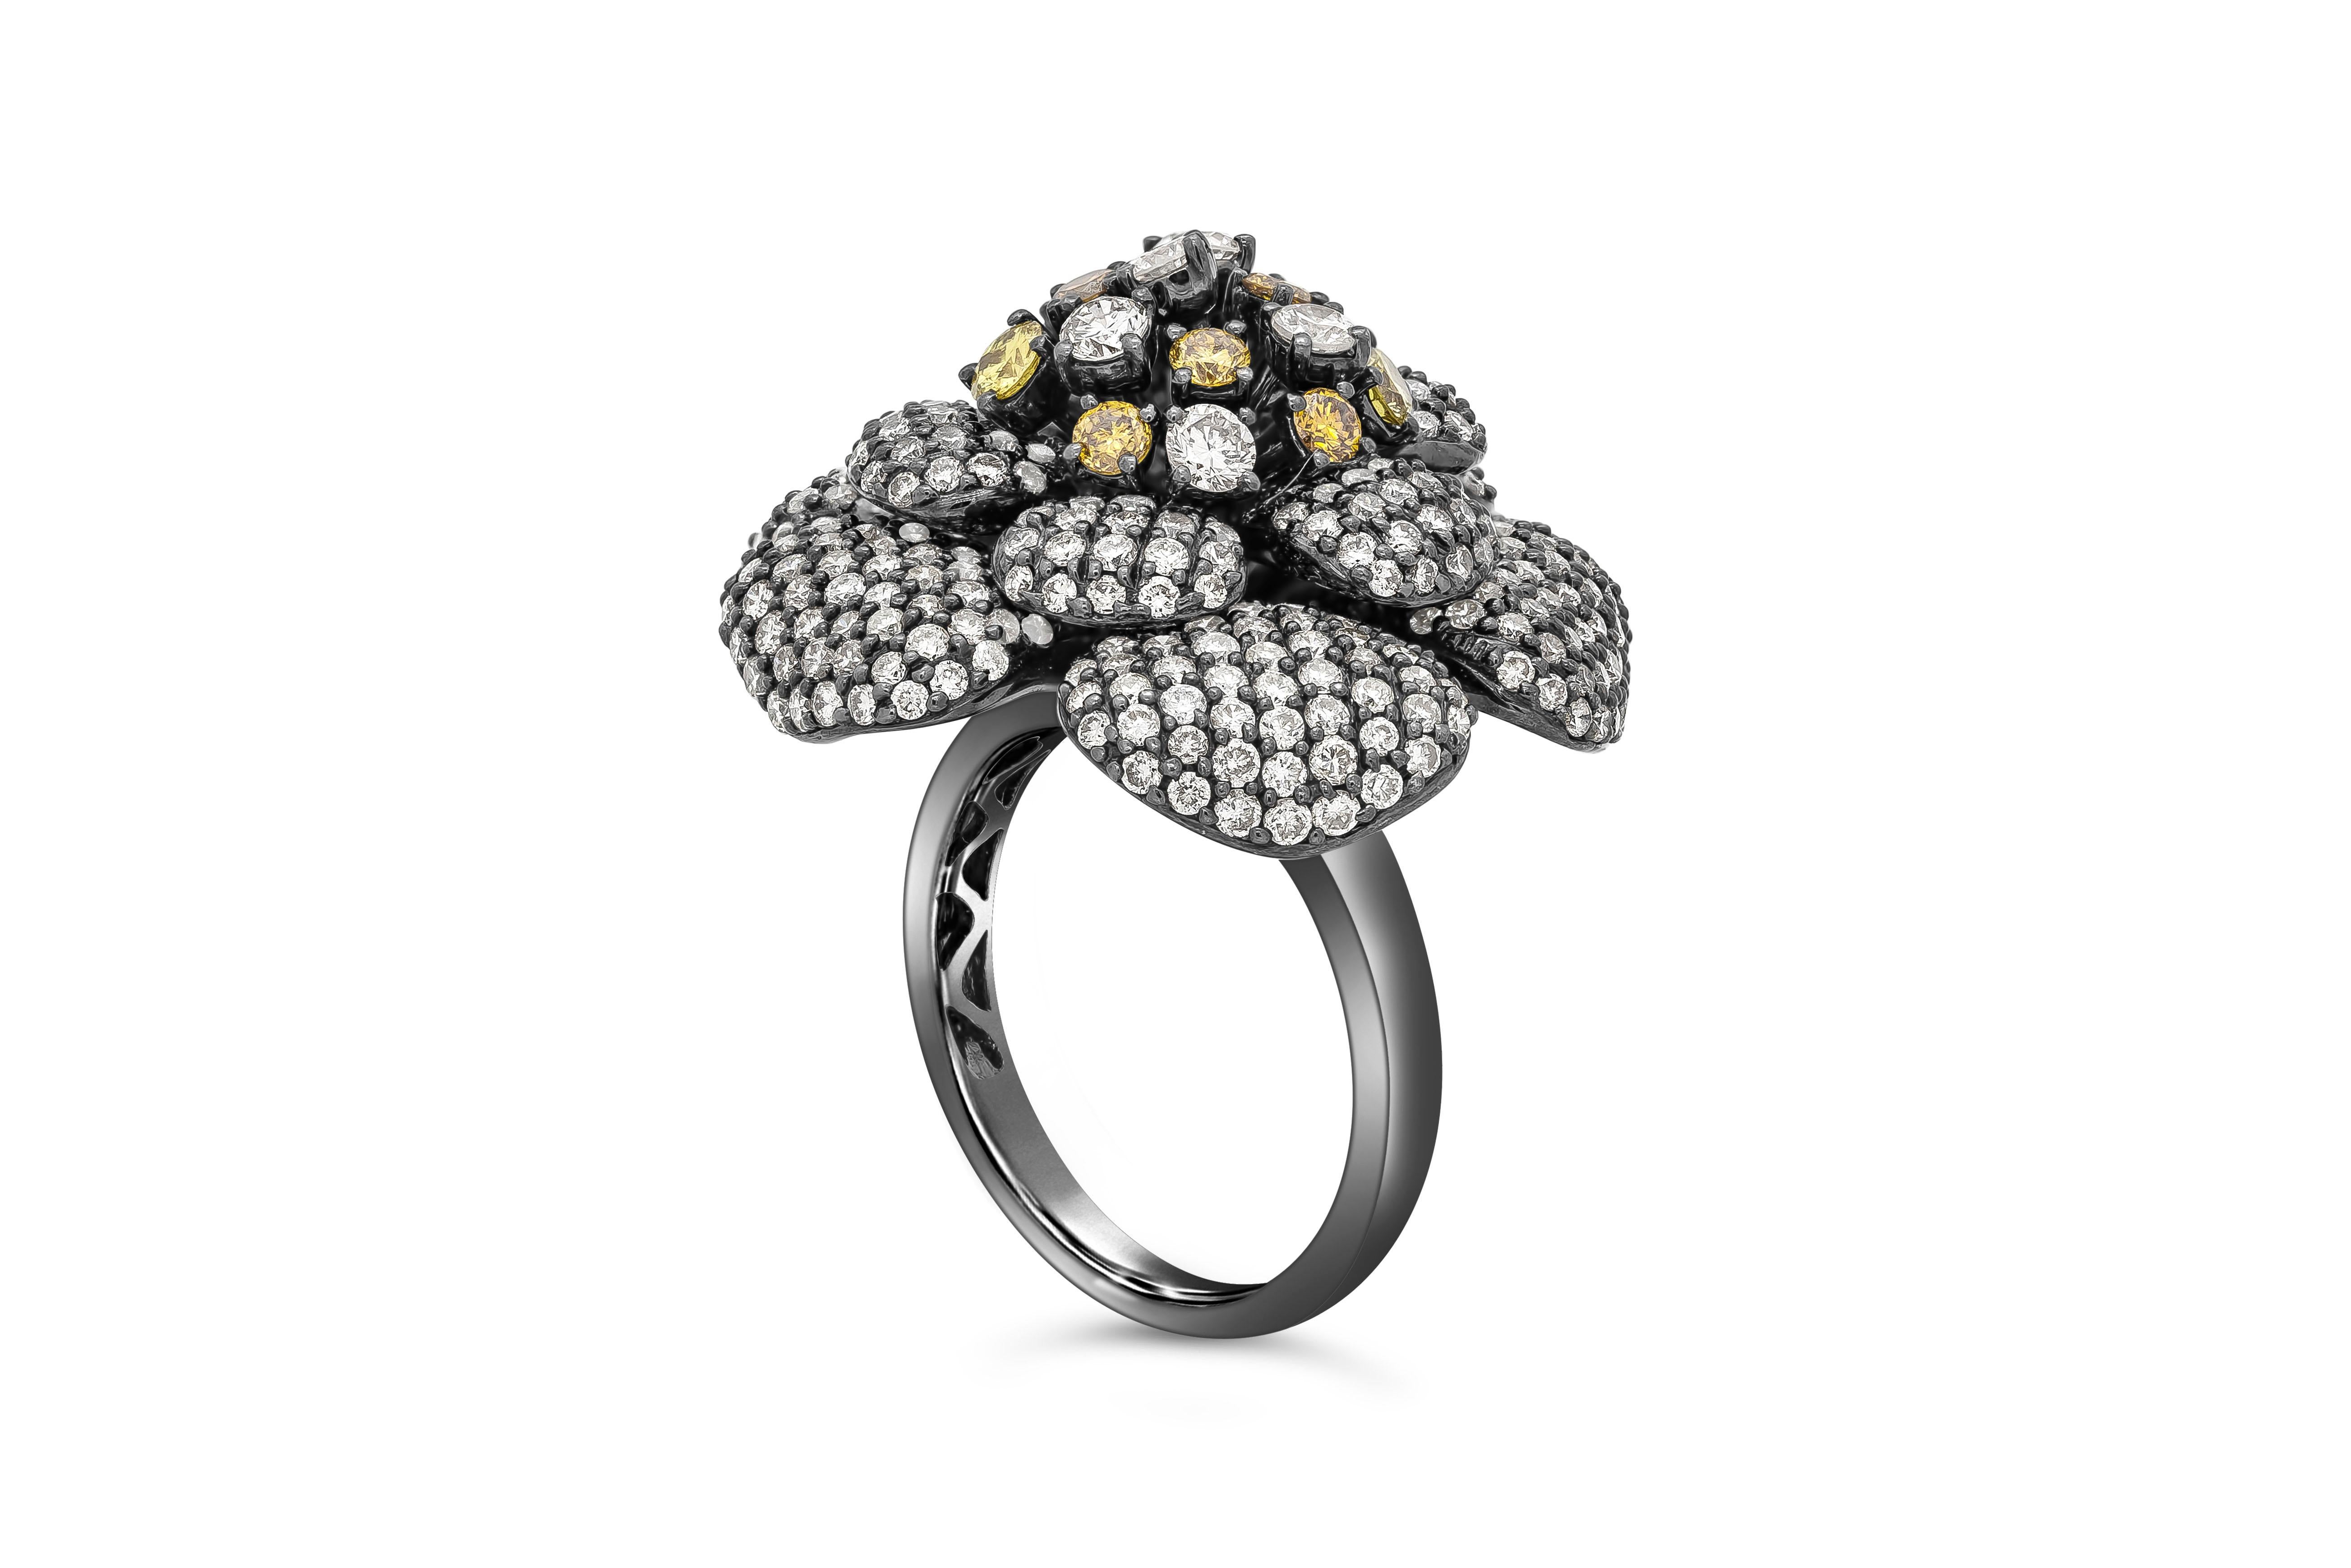 A unique fashion ring showcasing a cluster of fancy colored round diamonds accented with white round diamonds set in a petal leaf like design. Diamonds weigh 4.53 carats total. Made in 18K Gold in Black Rhodium.

Roman Malakov is a custom house,